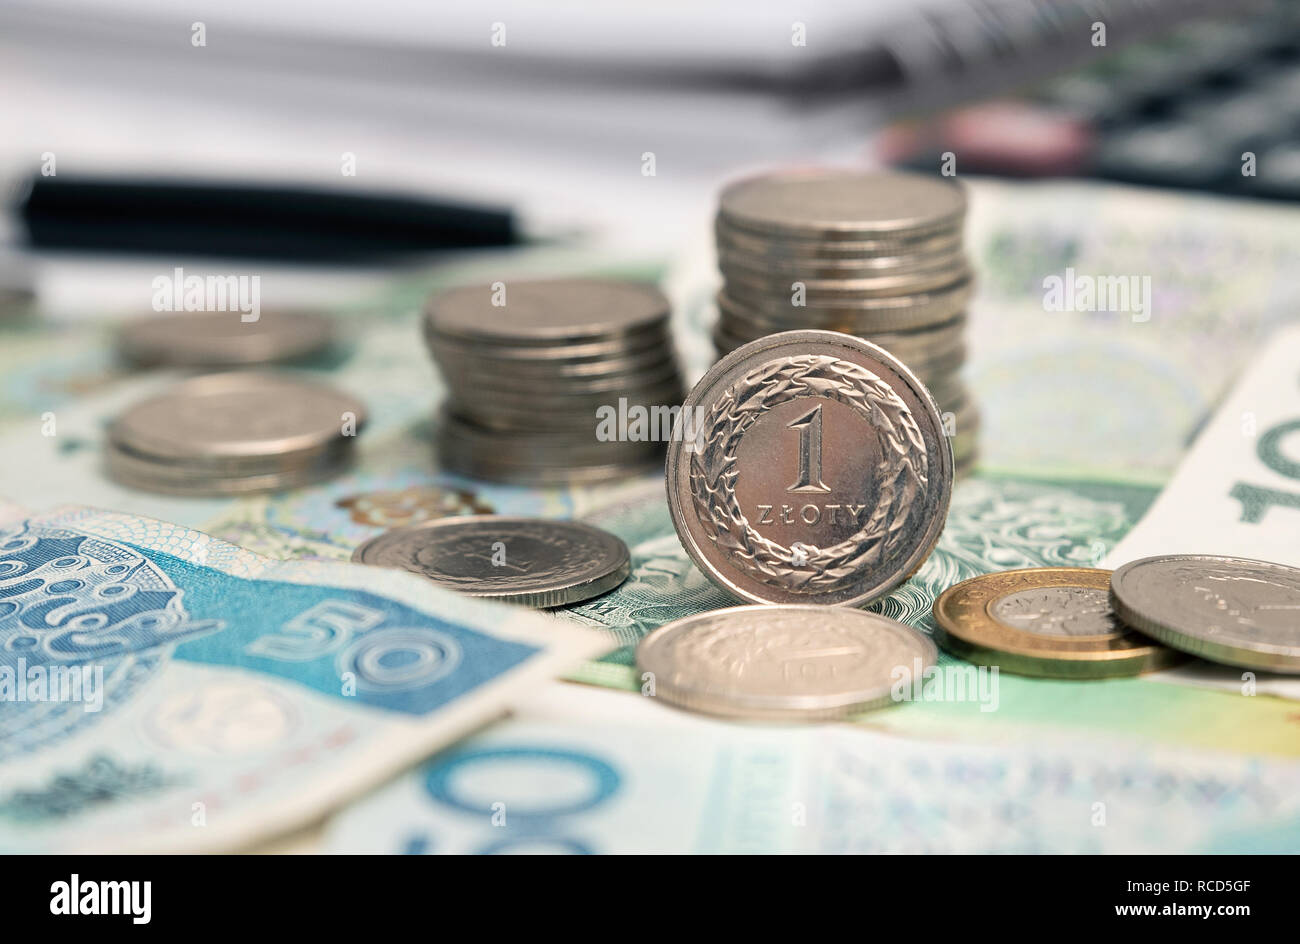 Polish currency, stack of Polish coins. The 1 zloty coin stands in the foreground. Business and financial concept Stock Photo